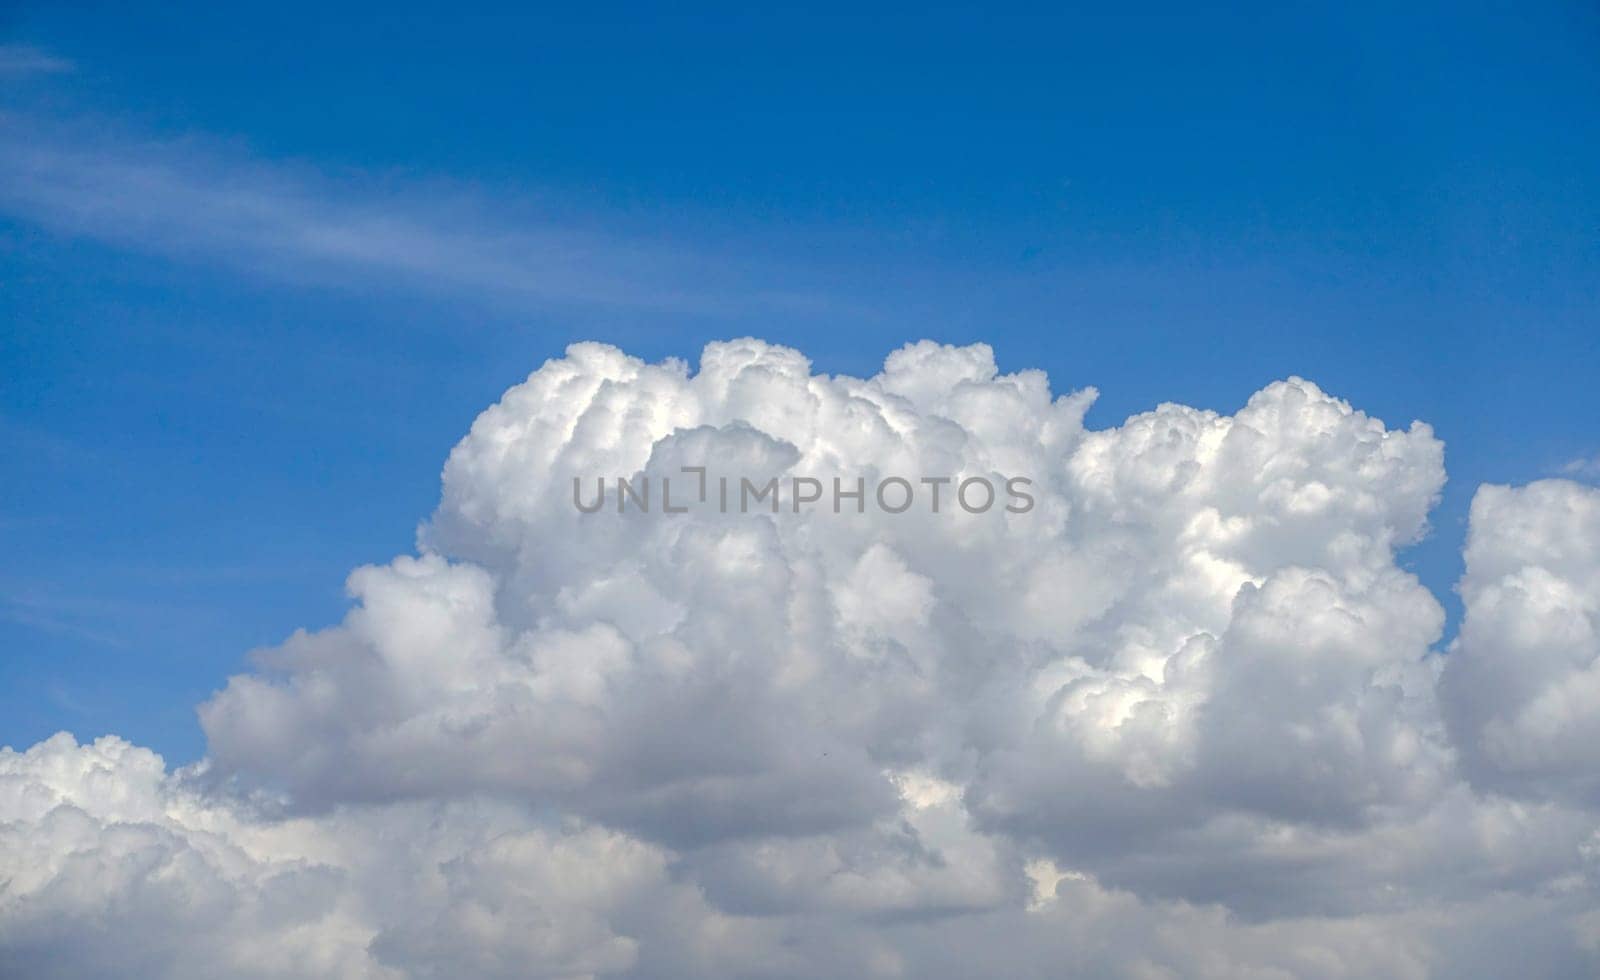 interesting cloud clusters in the sky, heavy rain clouds, interesting cloud shapes, wonderful white clouds that look like cotton, by nhatipoglu